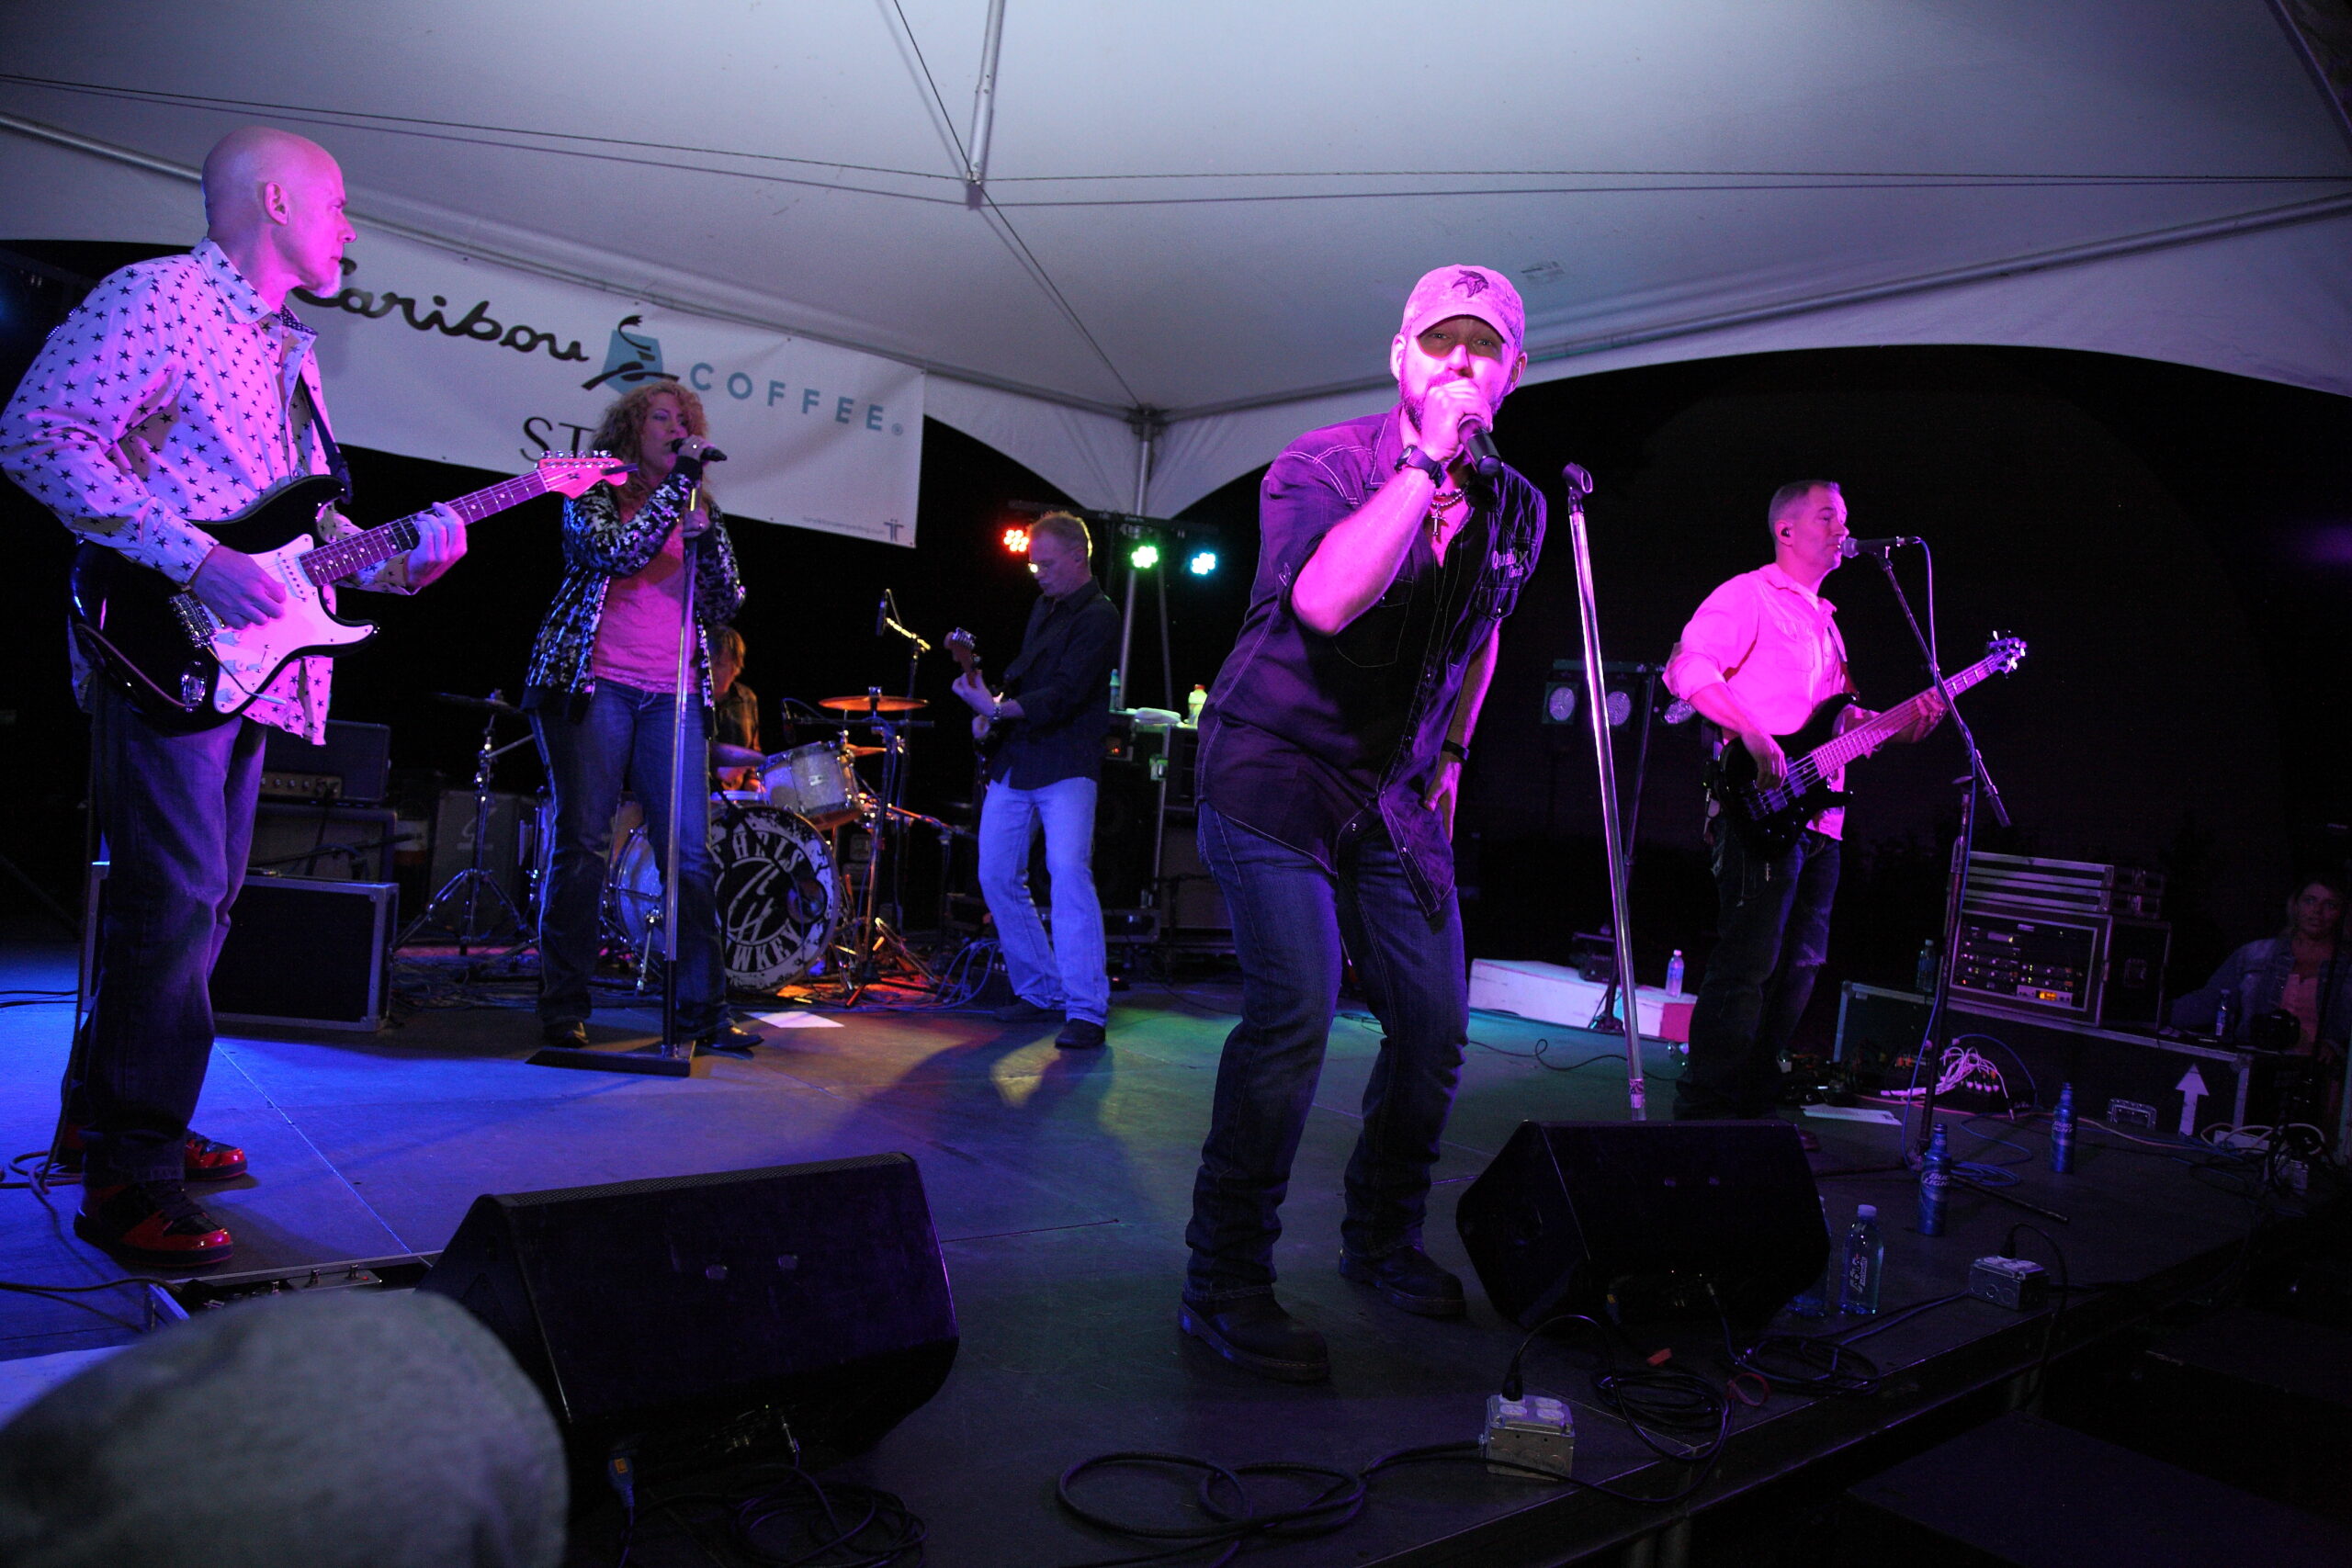 Chris Hawkey and his band Rocket Club performing t BreastFest 2014